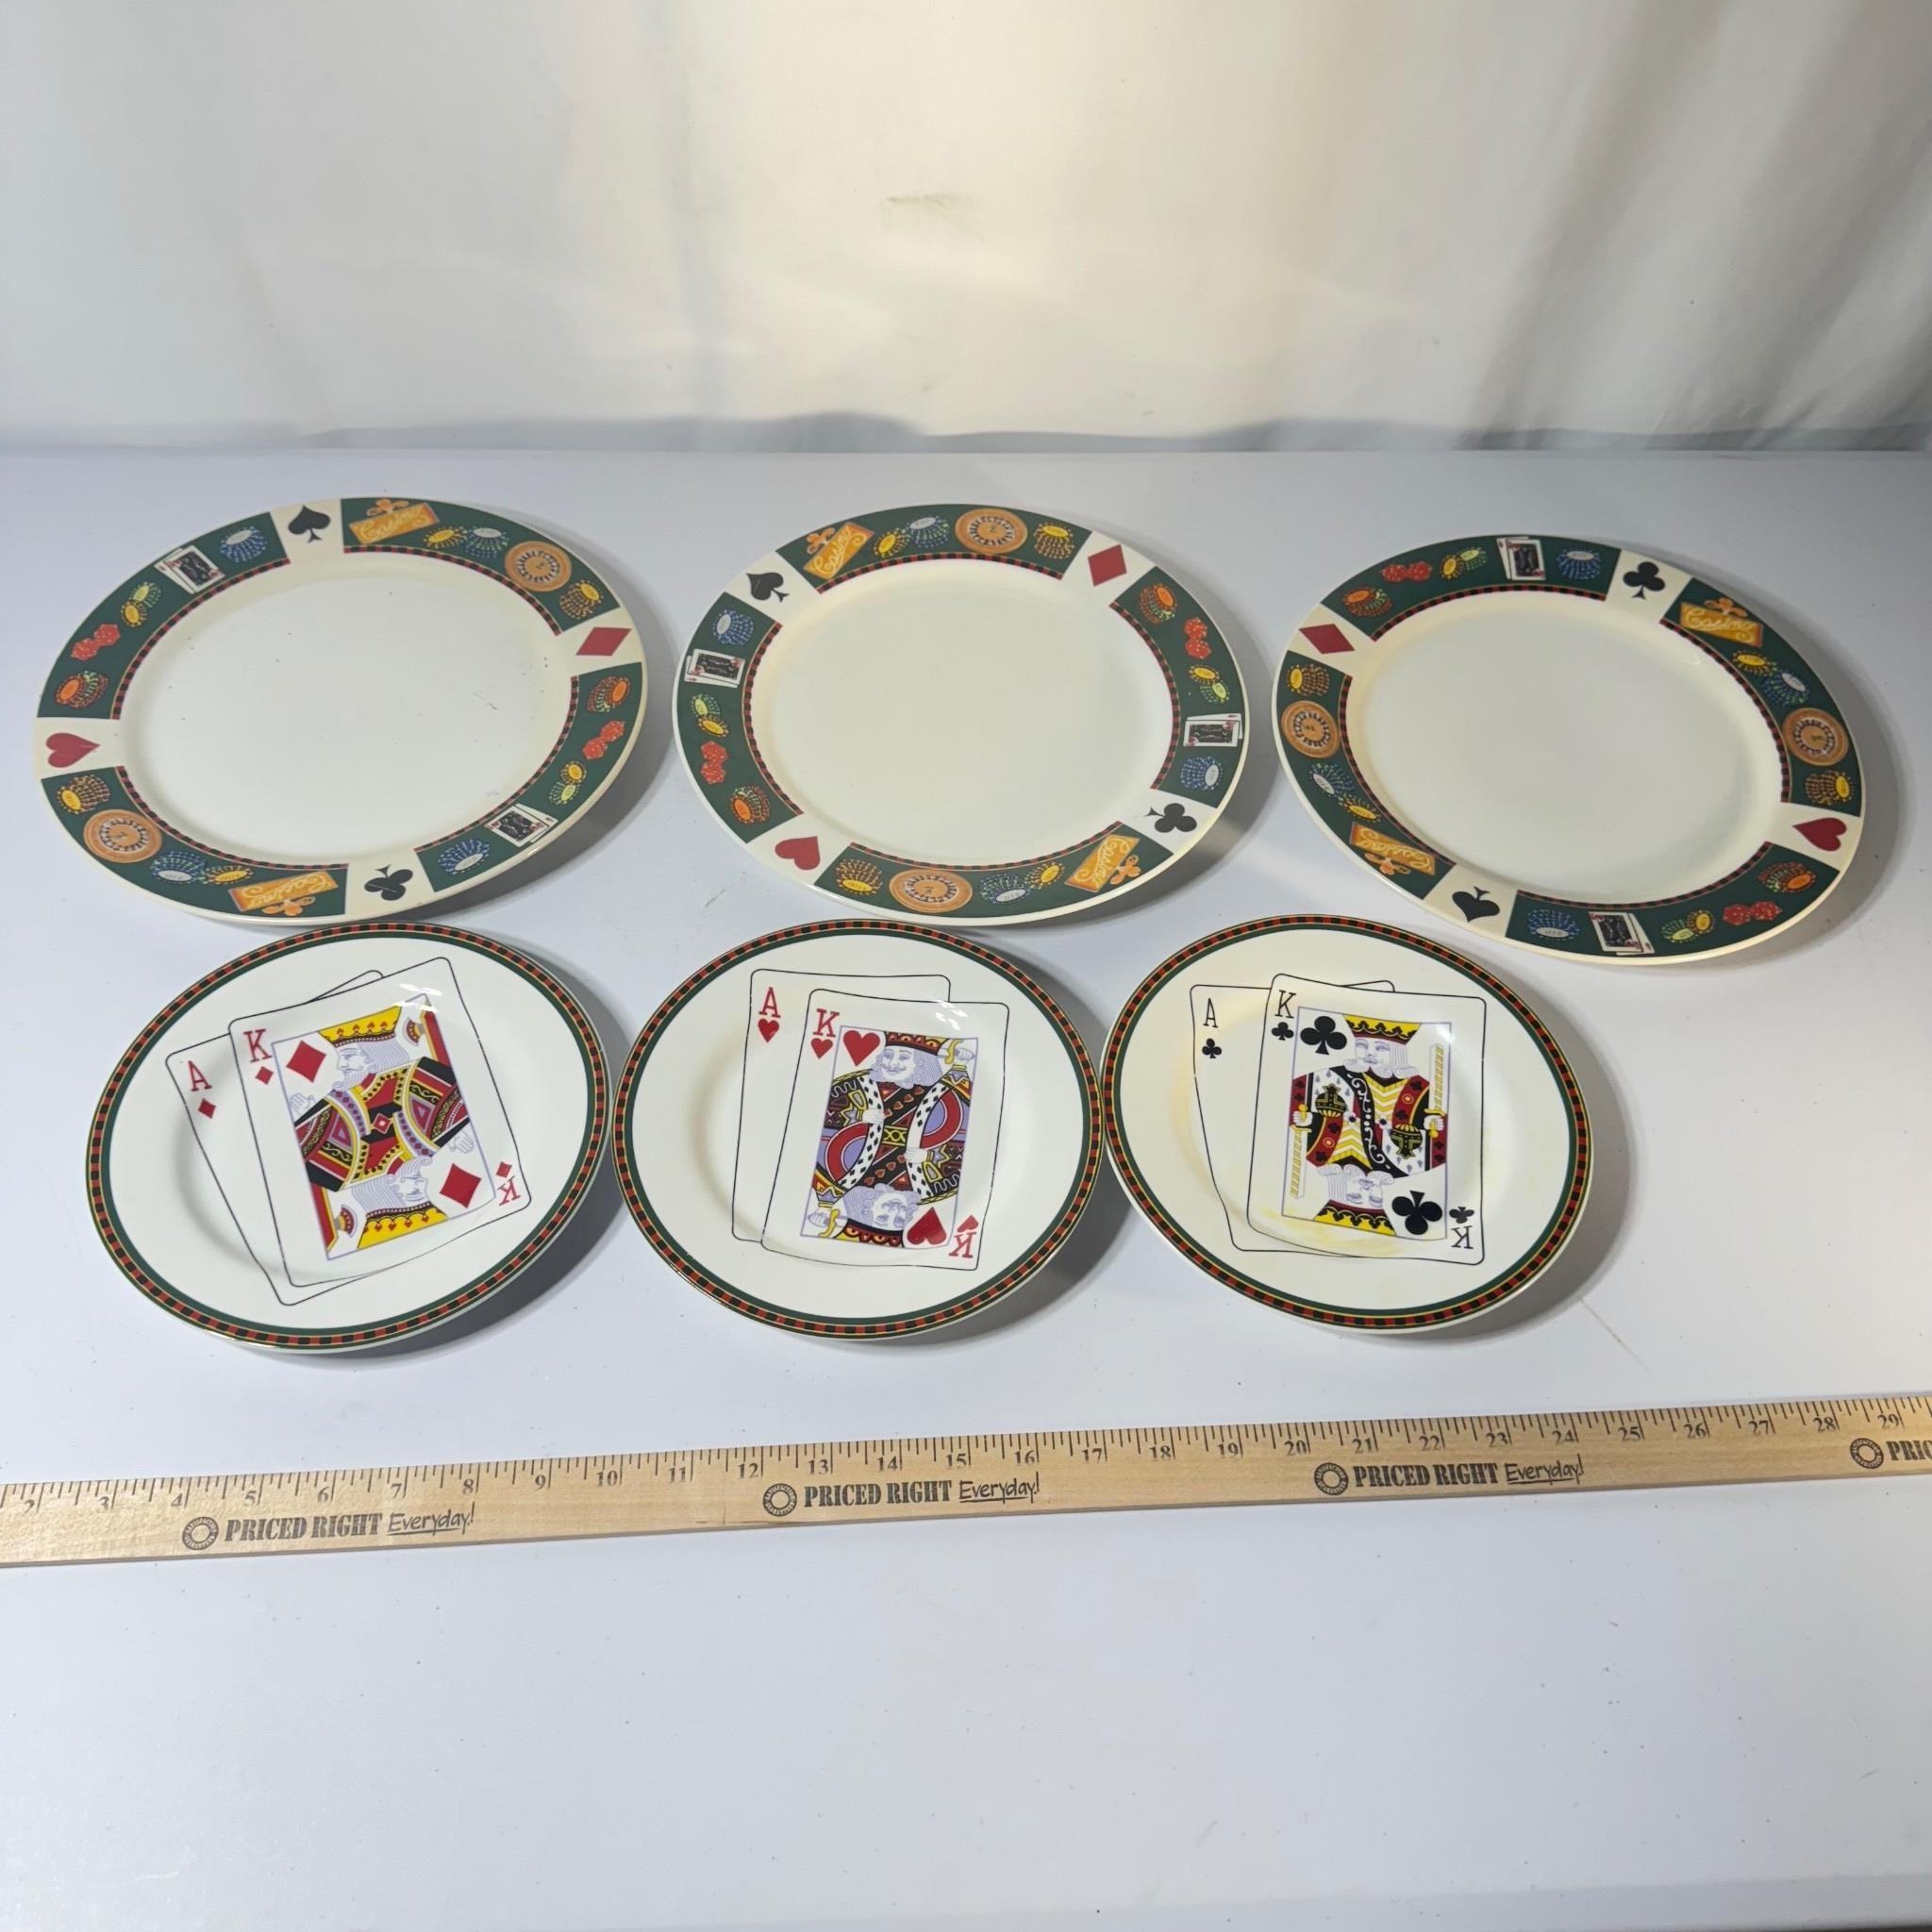 Poker Night Party Plates